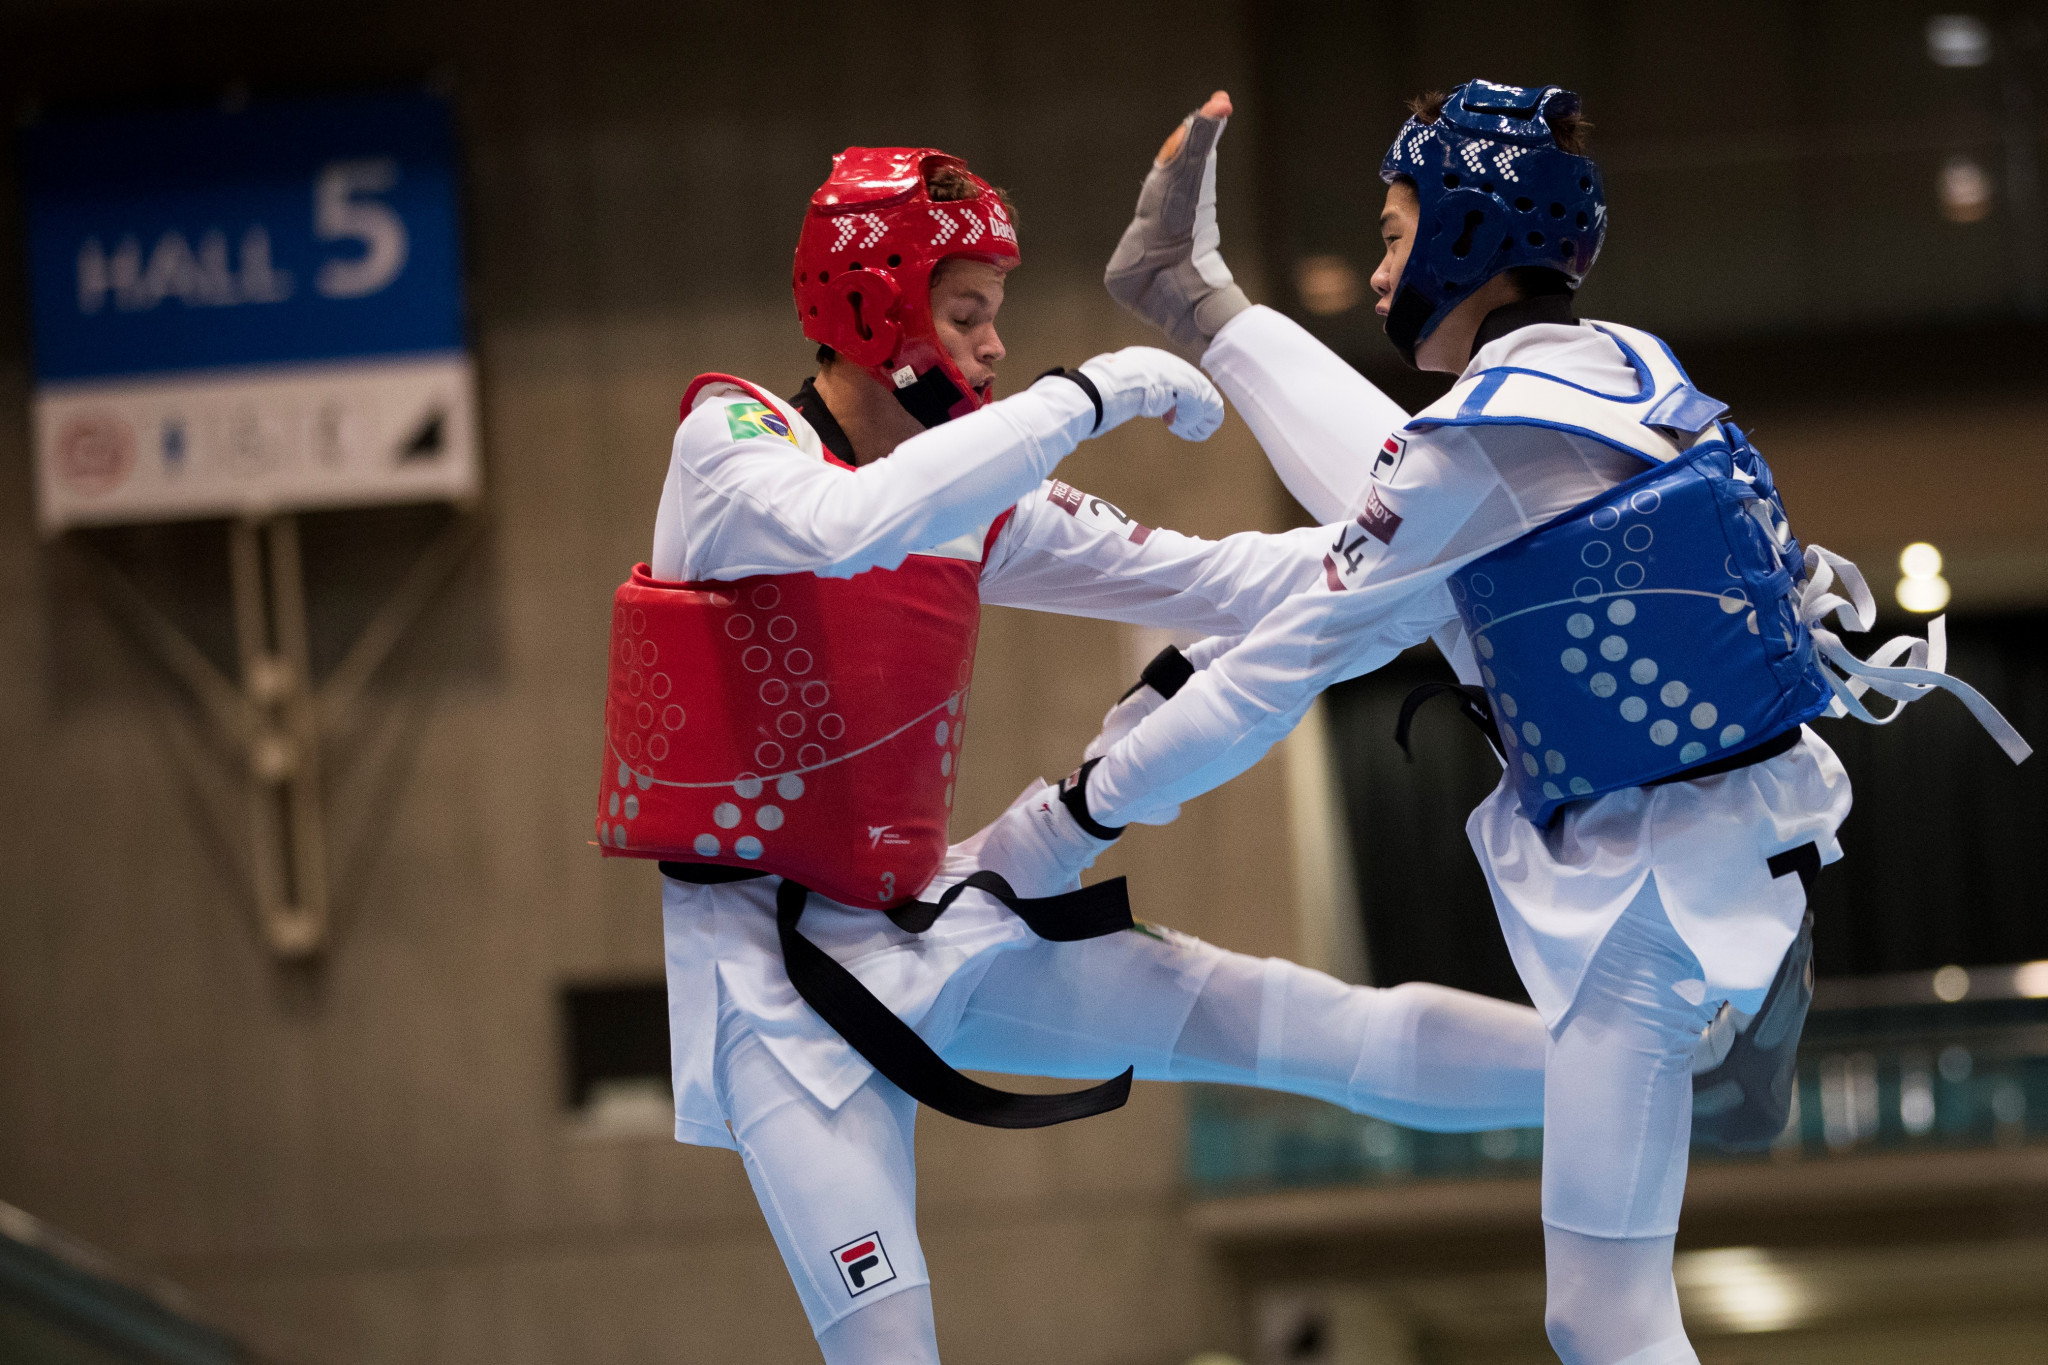 Brazil, Mexico and Colombia start well at Pan American Taekwondo Championships